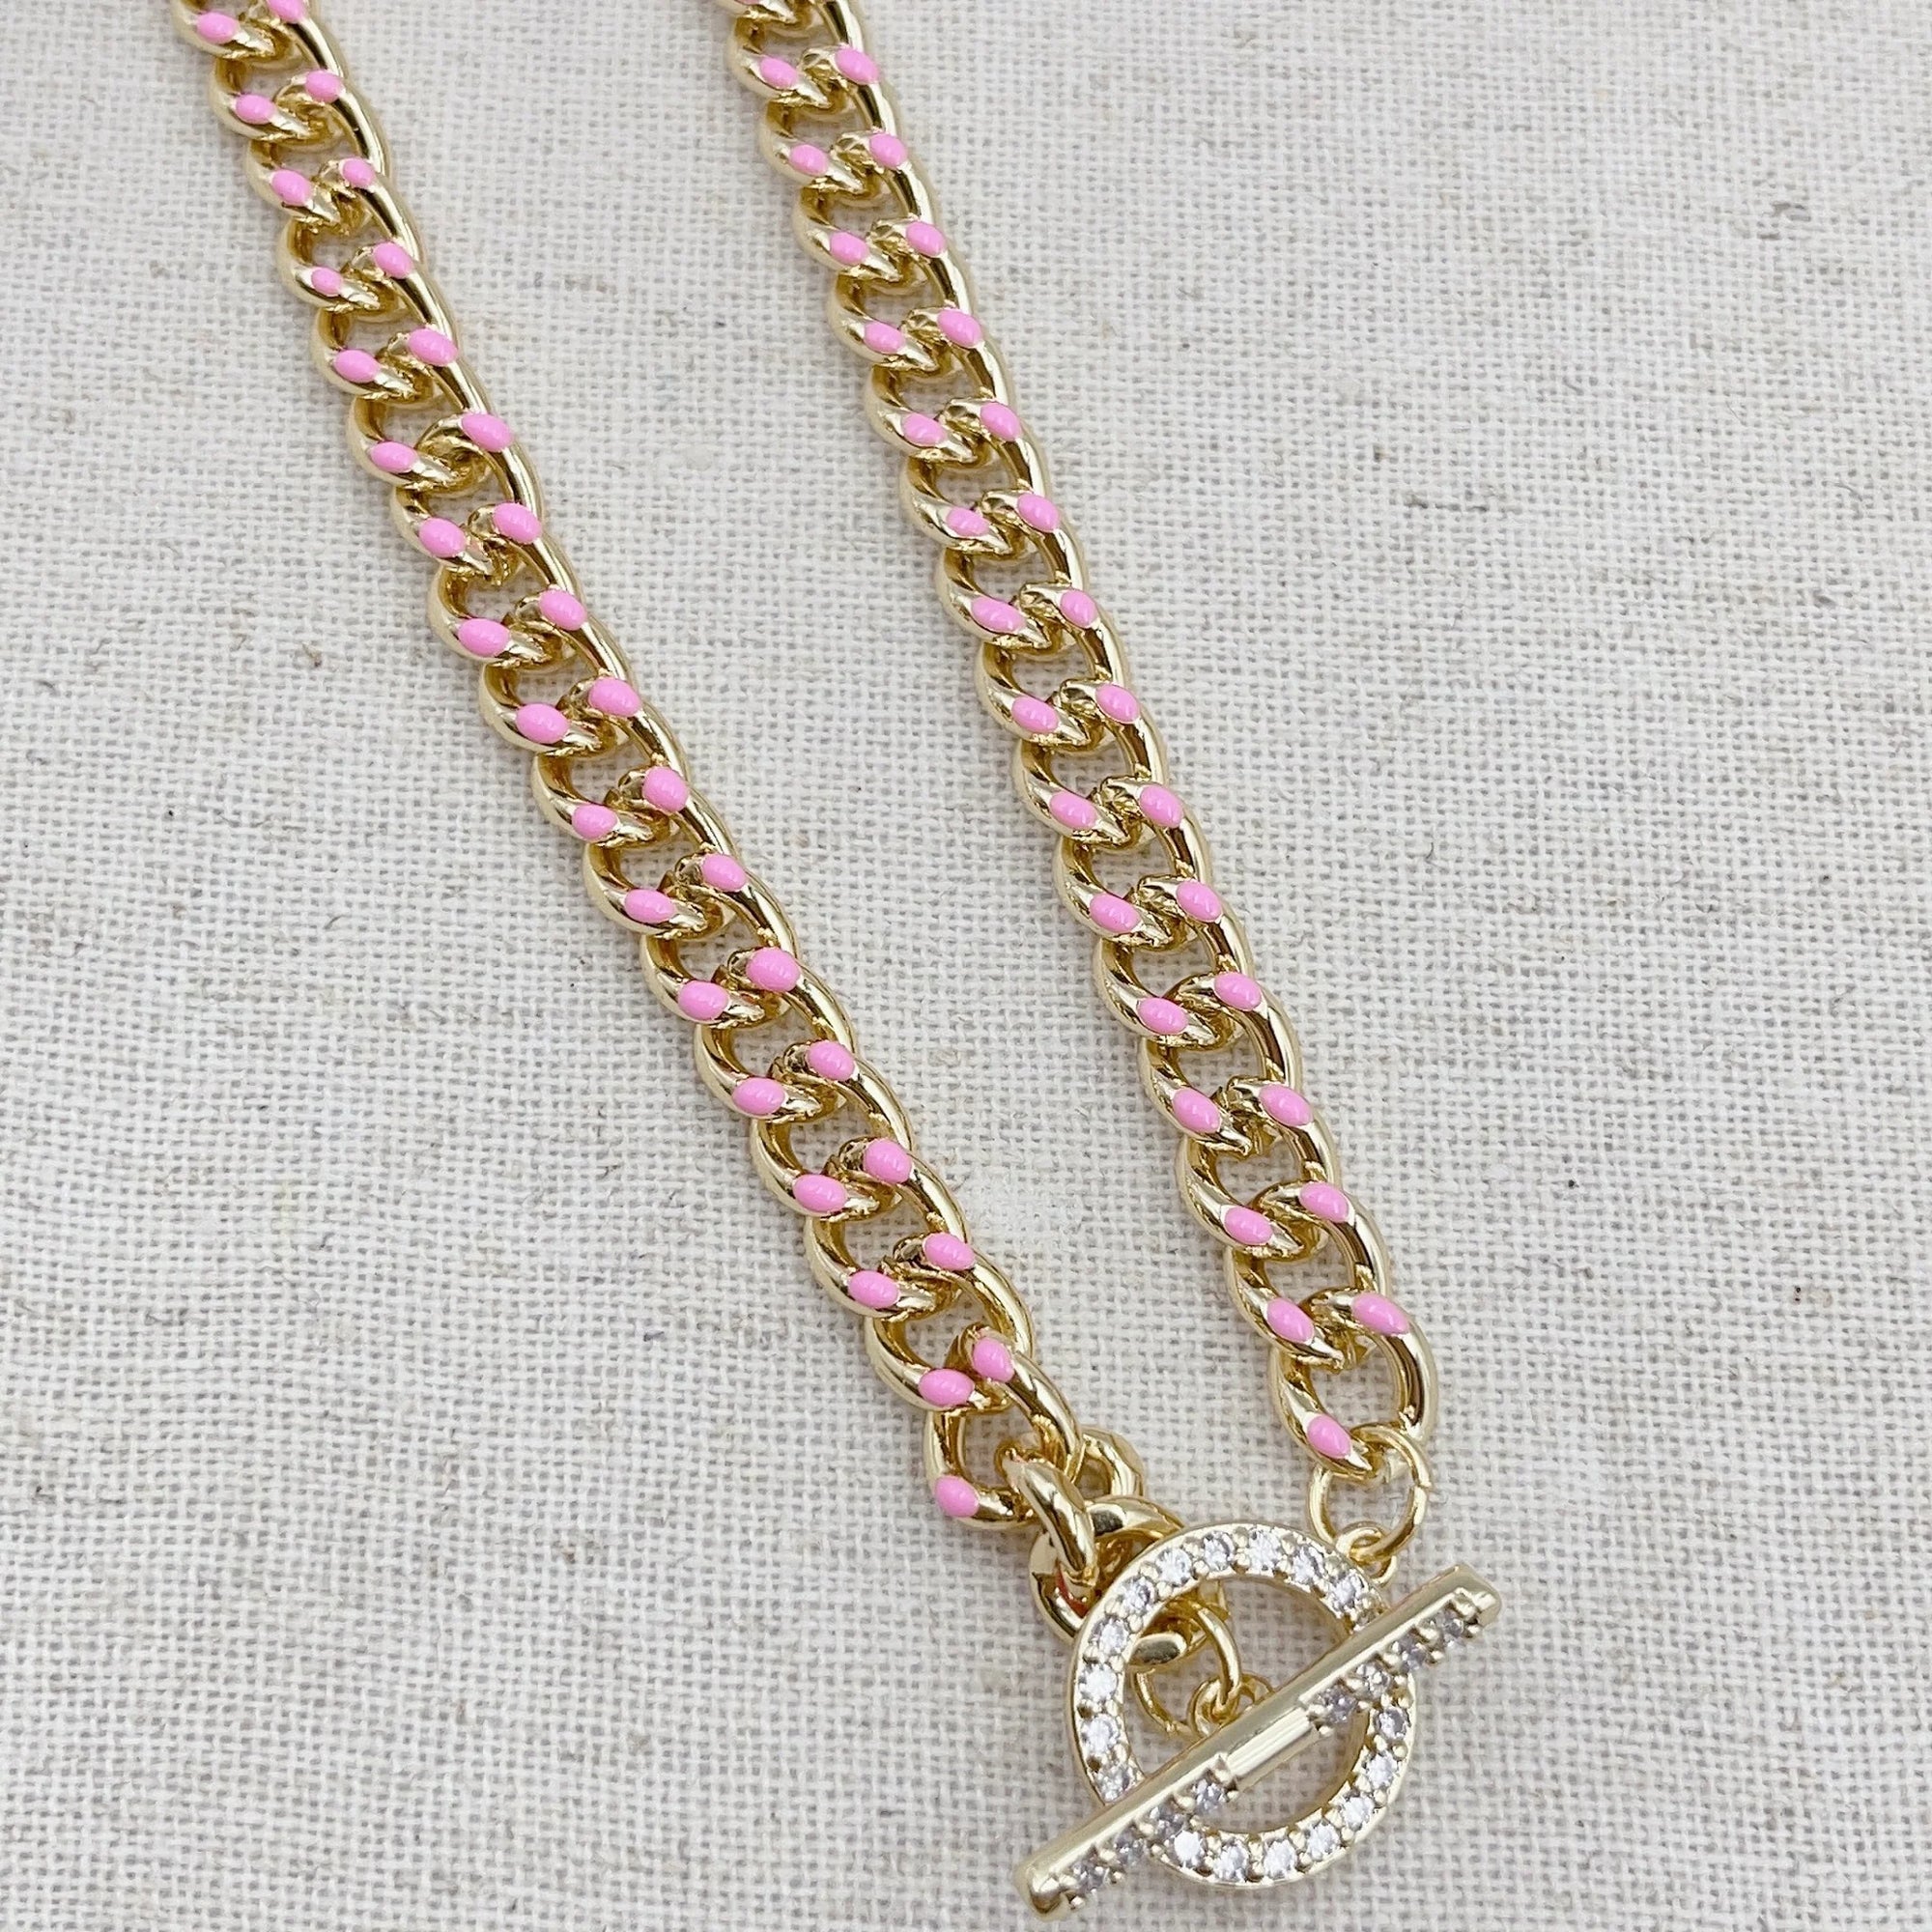 PINK CHUNKY CHAIN NECKLACE TREASURE JEWELS